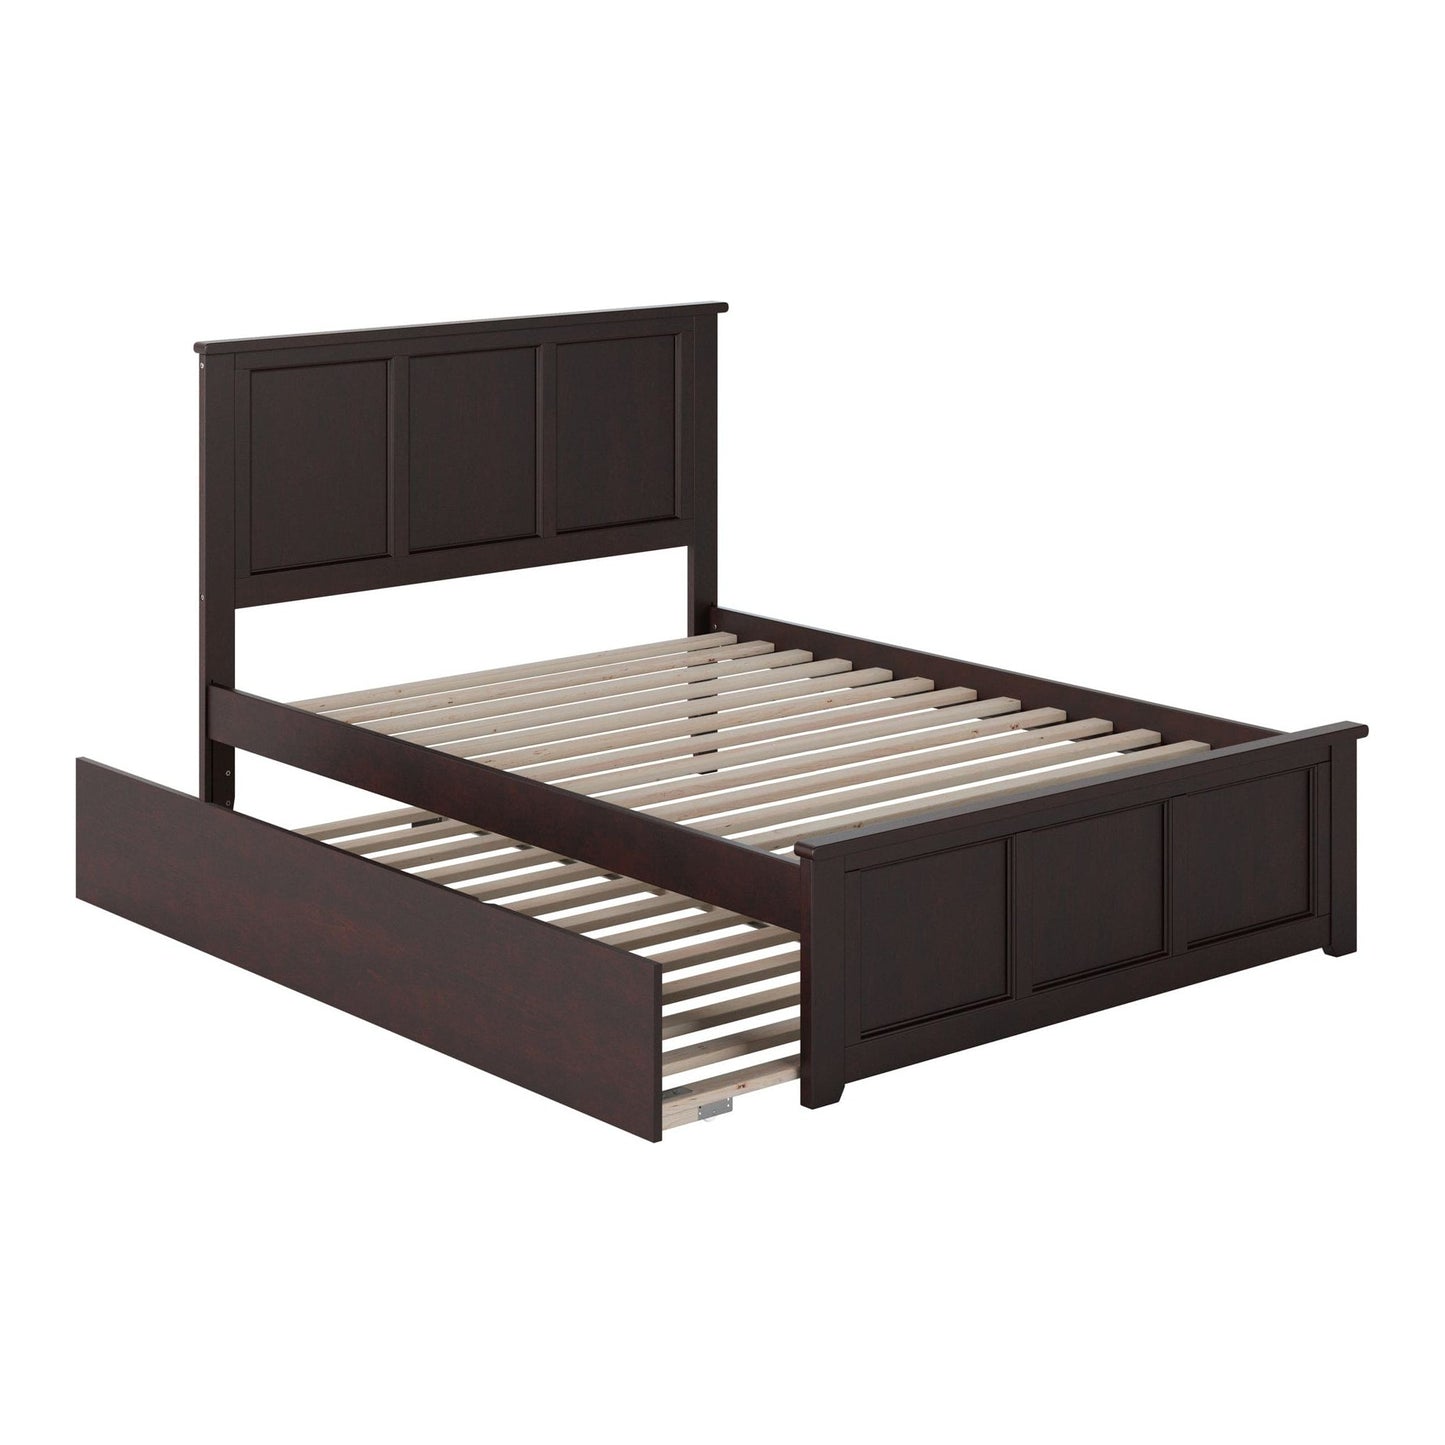 AFI Furnishings Madison Full Platform Bed with Matching Footboard with Twin Size Urban Trundle Bed